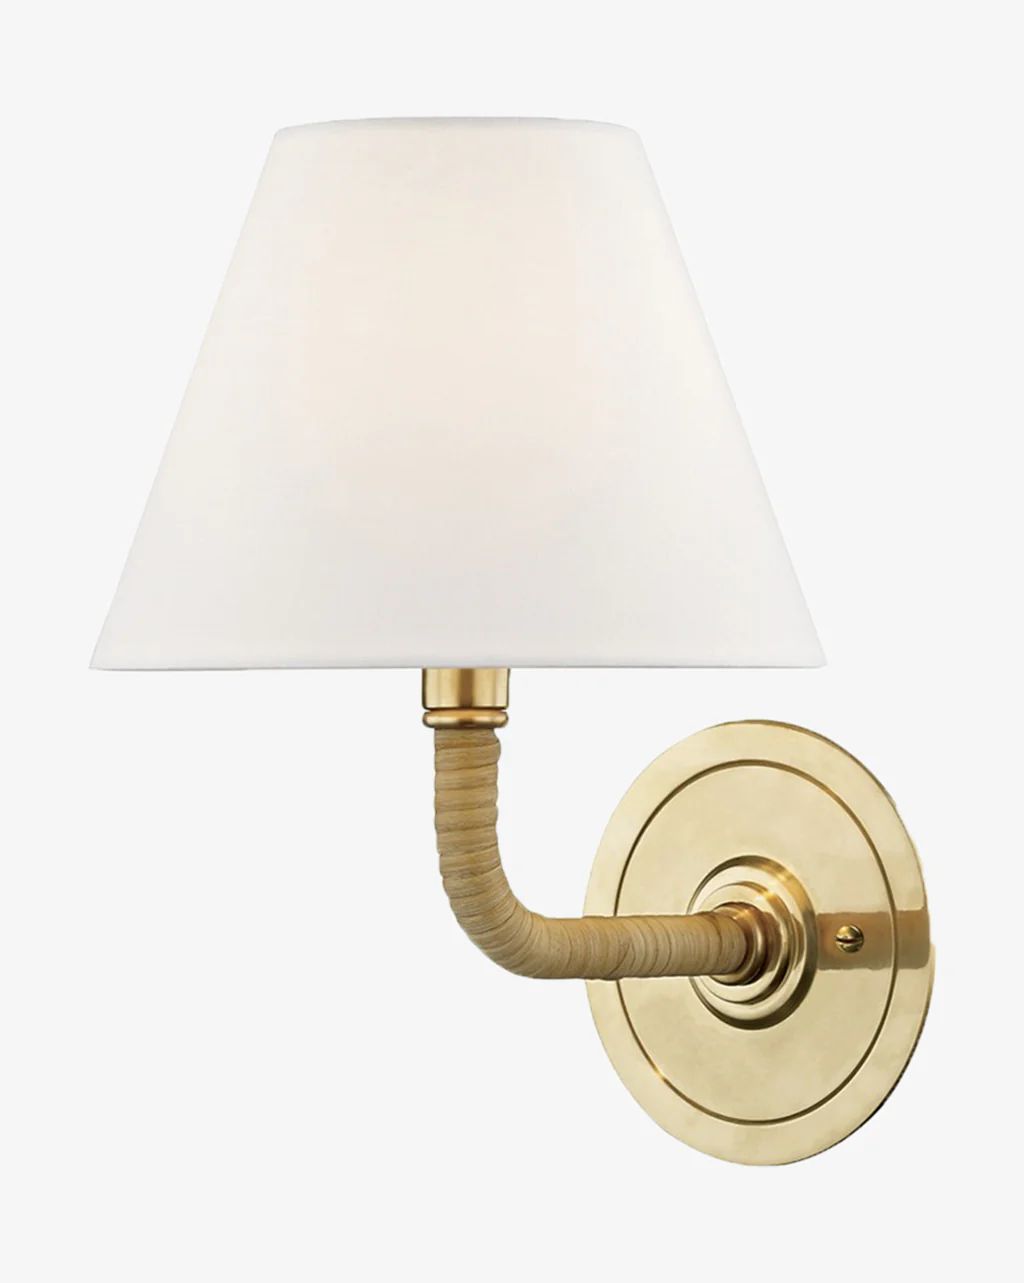 Emmi Wall Sconce | McGee & Co.